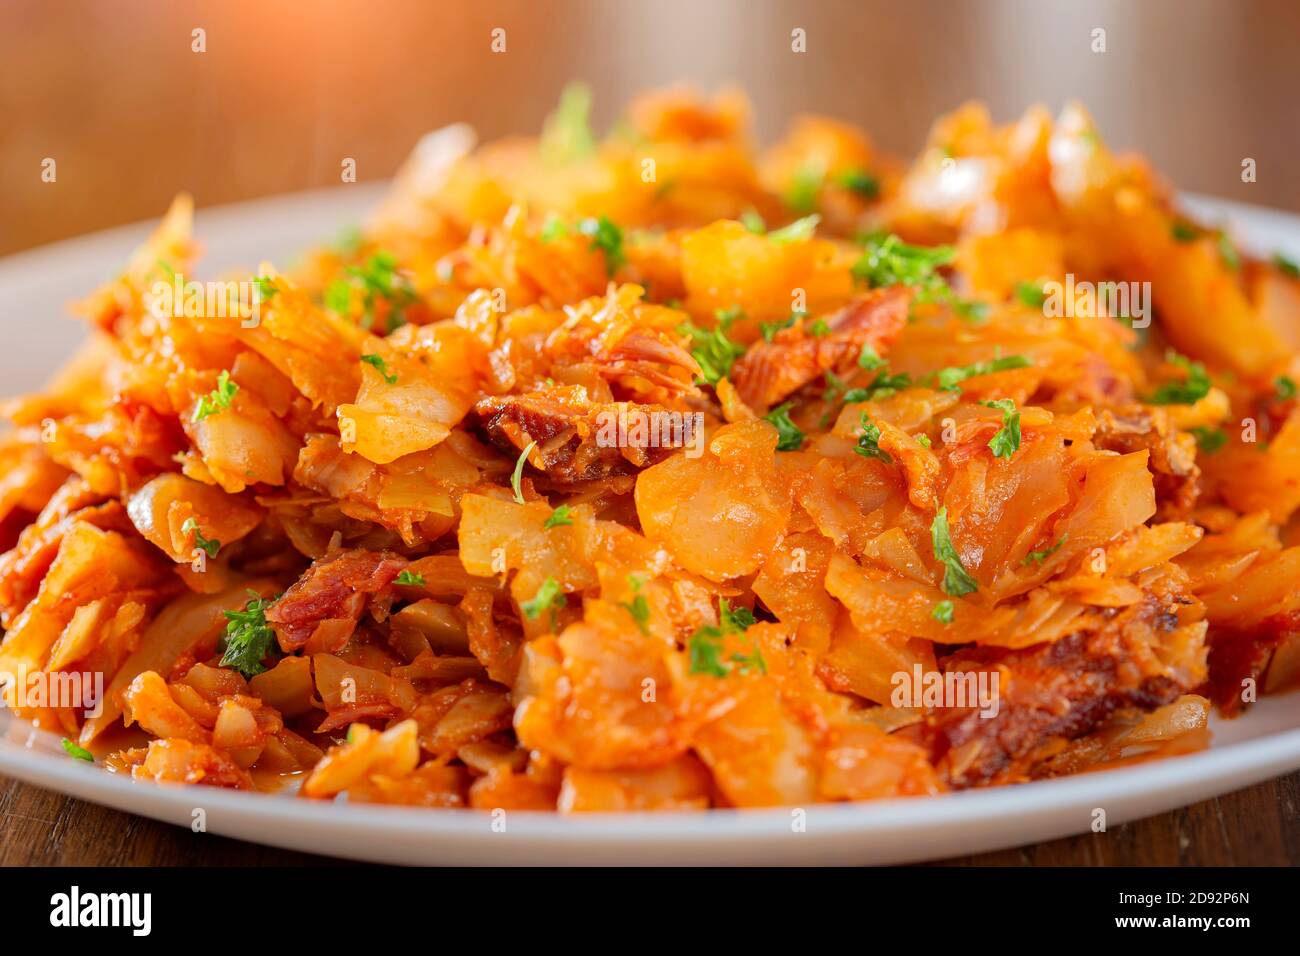 Cabbage stew whith meat from smoked pork ribs Stock Photo